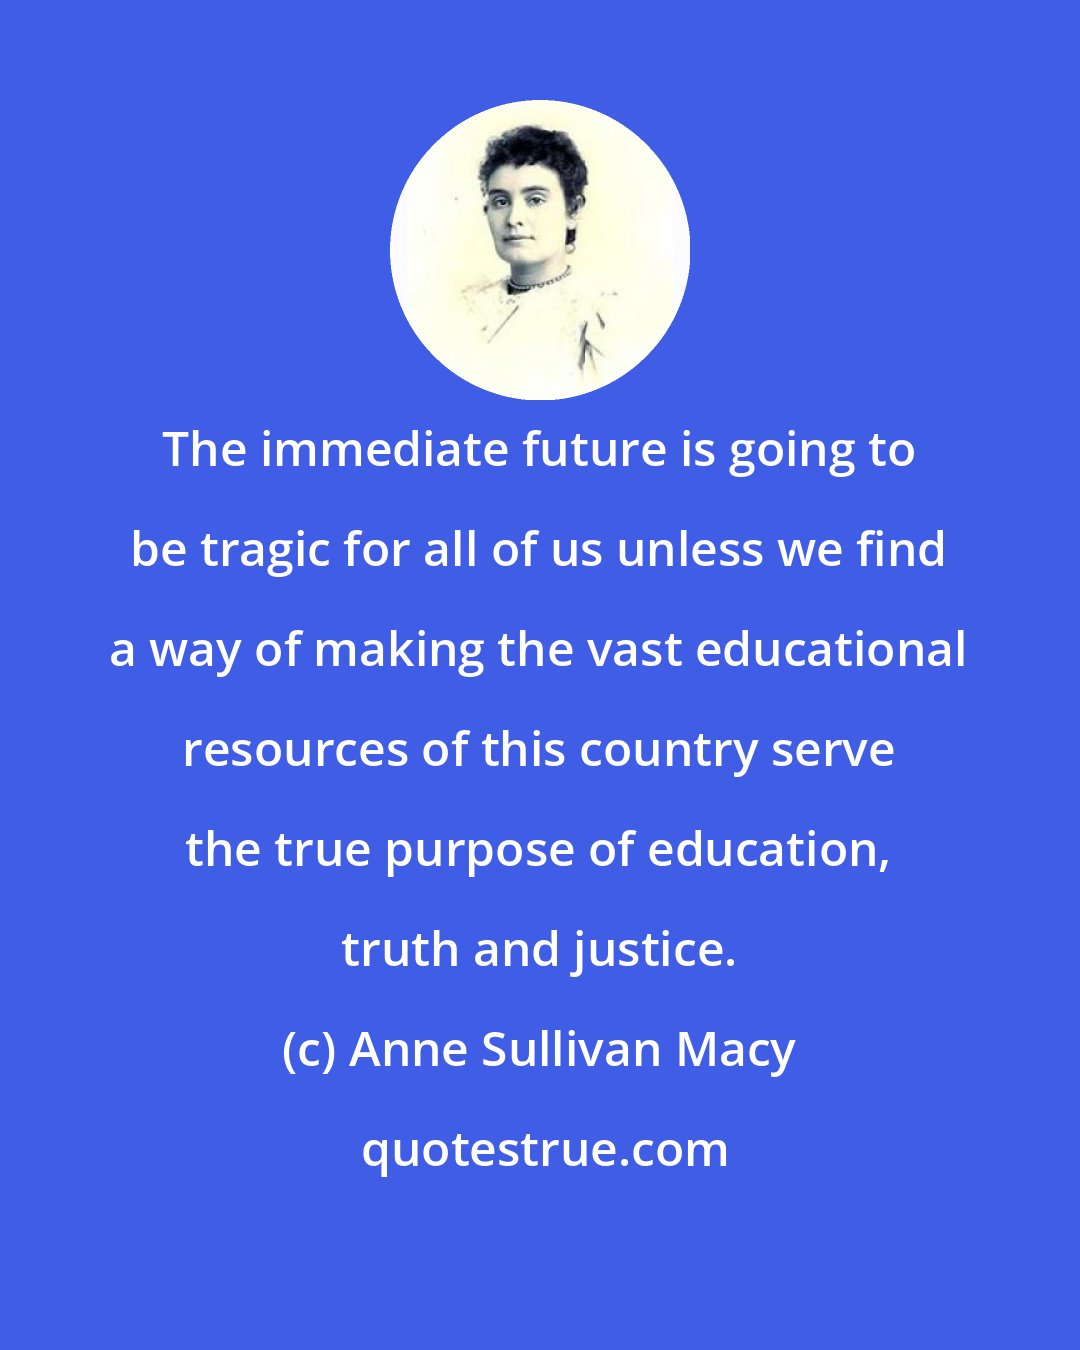 Anne Sullivan Macy: The immediate future is going to be tragic for all of us unless we find a way of making the vast educational resources of this country serve the true purpose of education, truth and justice.